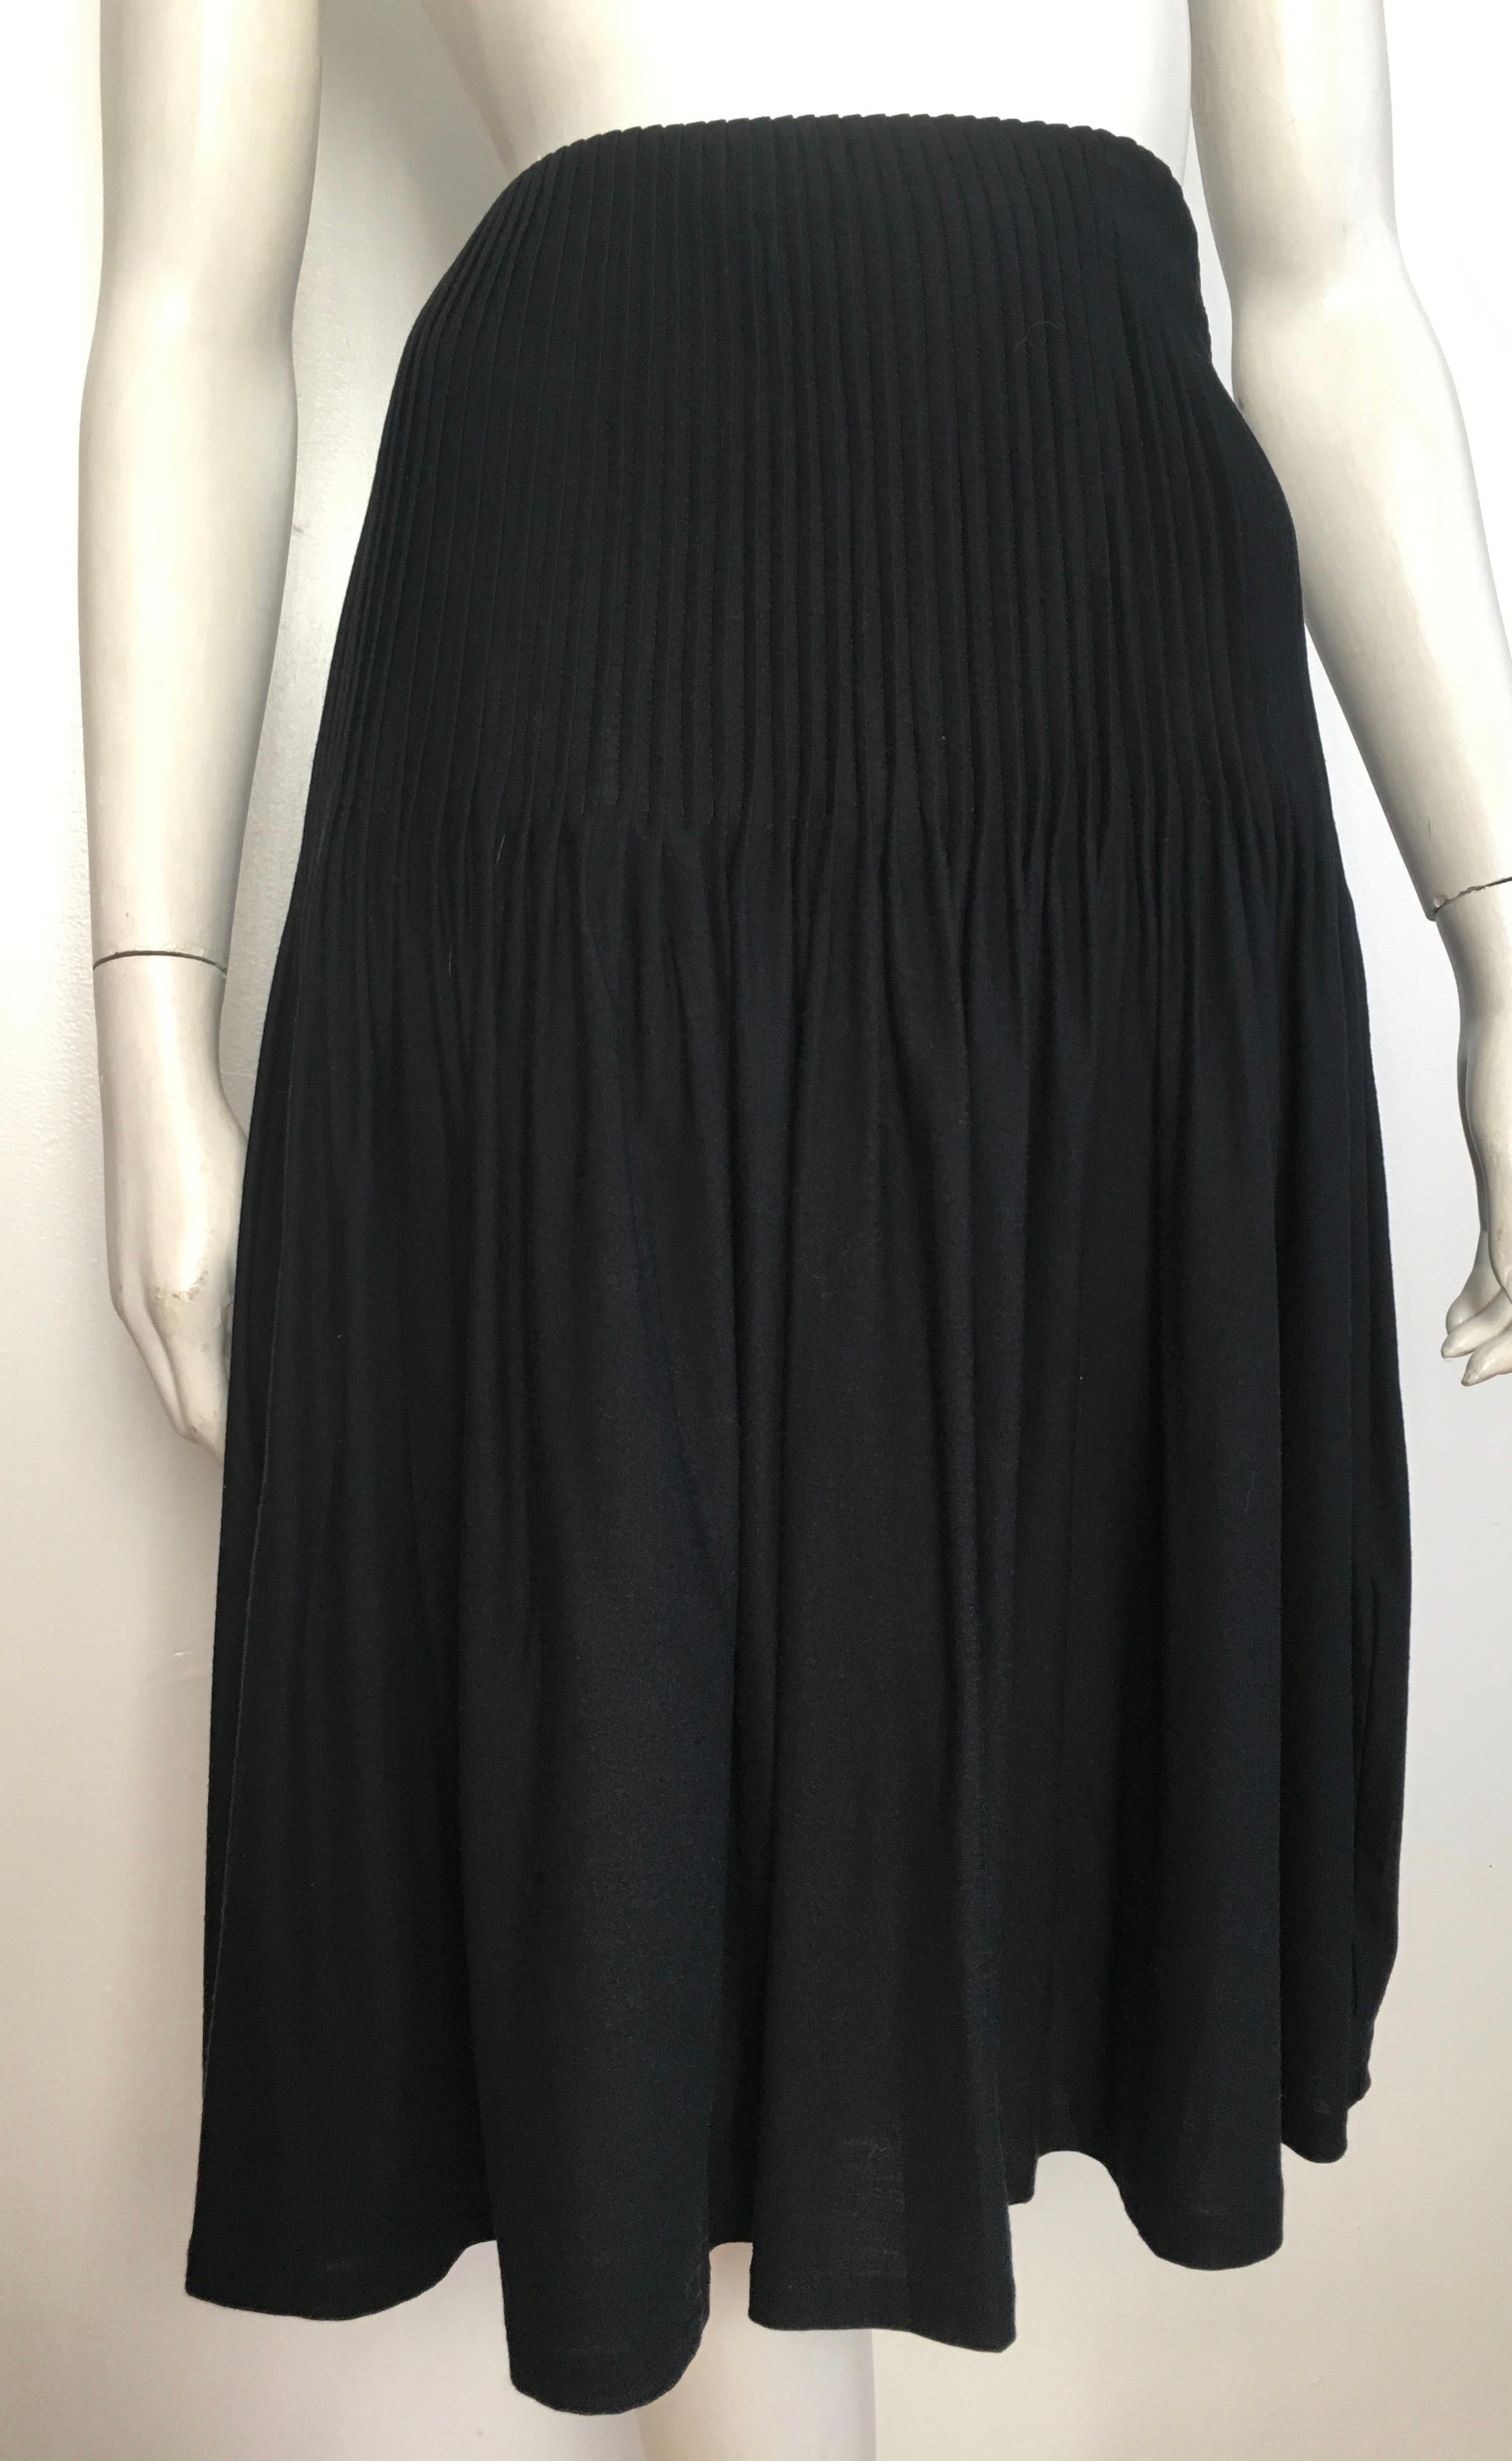 Emanuel Ungaro 1990s silk & cotton jersey black pleated skirt is labeled a size medium and will fit a size 10.  The waist on this skirt is 33